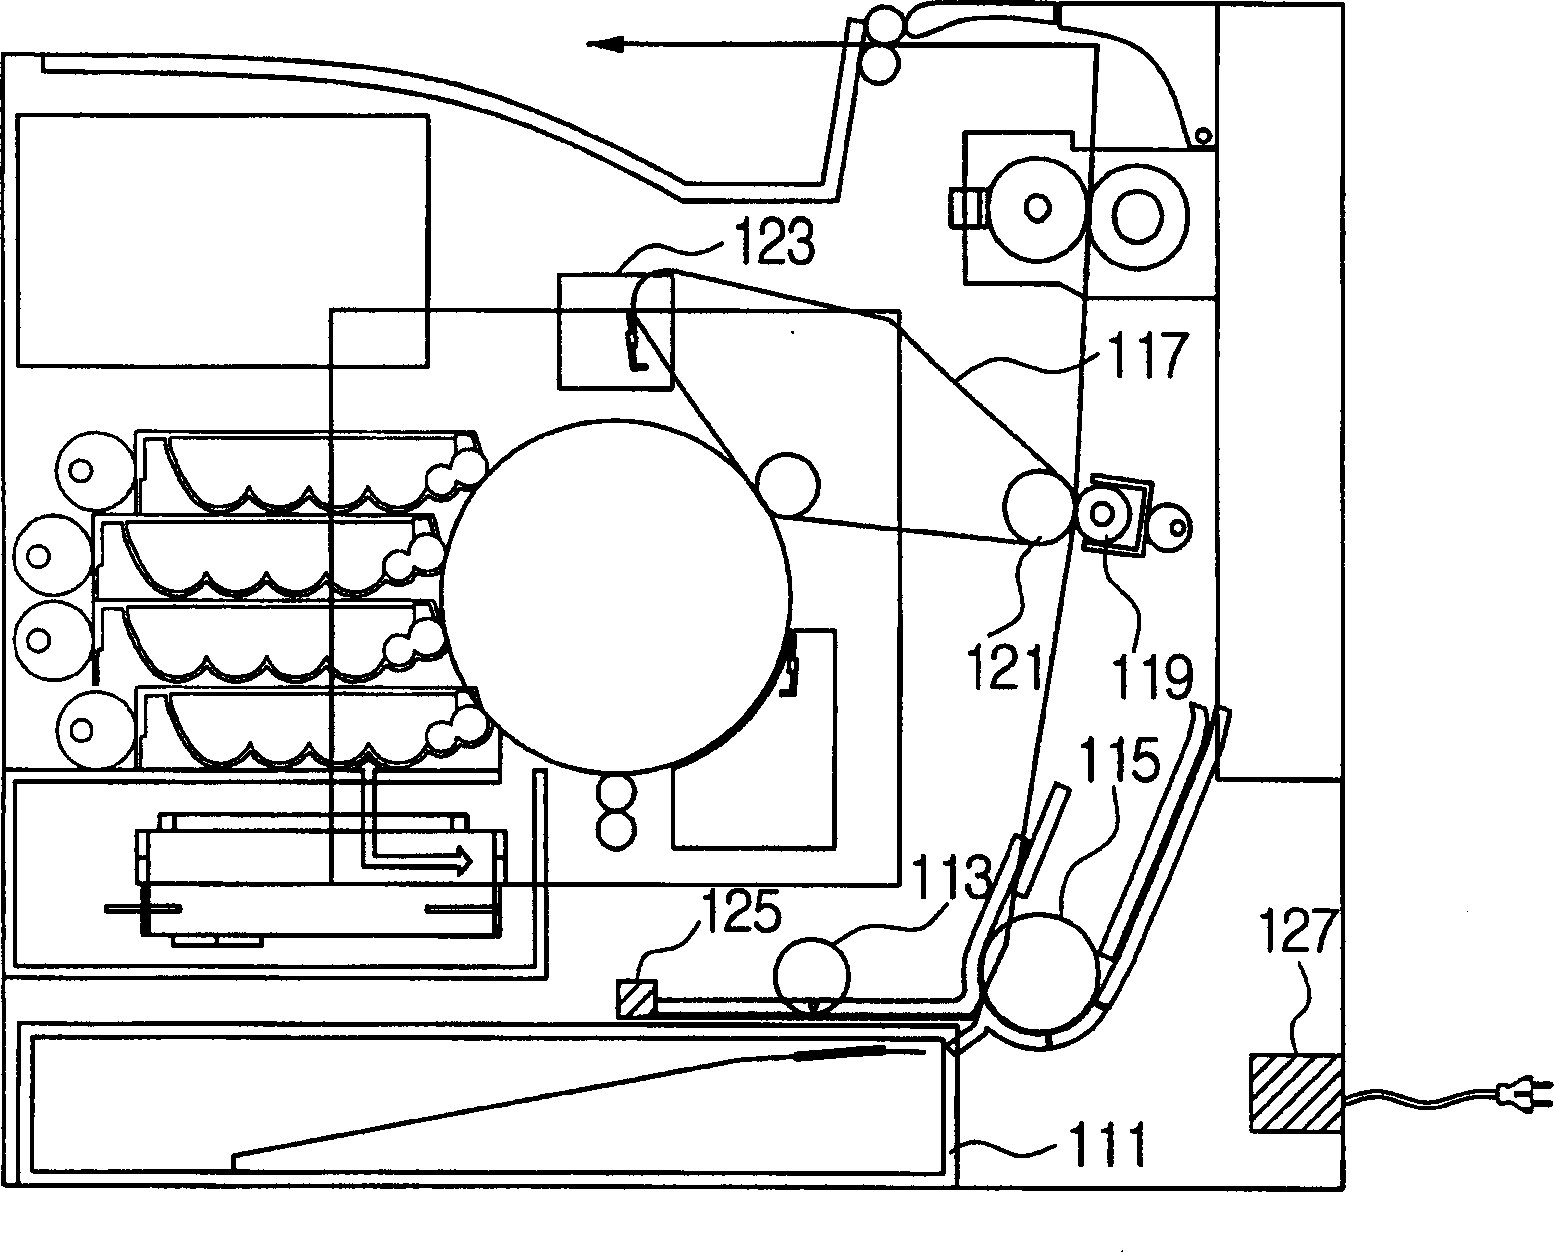 Double-face electronic processor-camera mechanism and method for controlling its toner image concentration